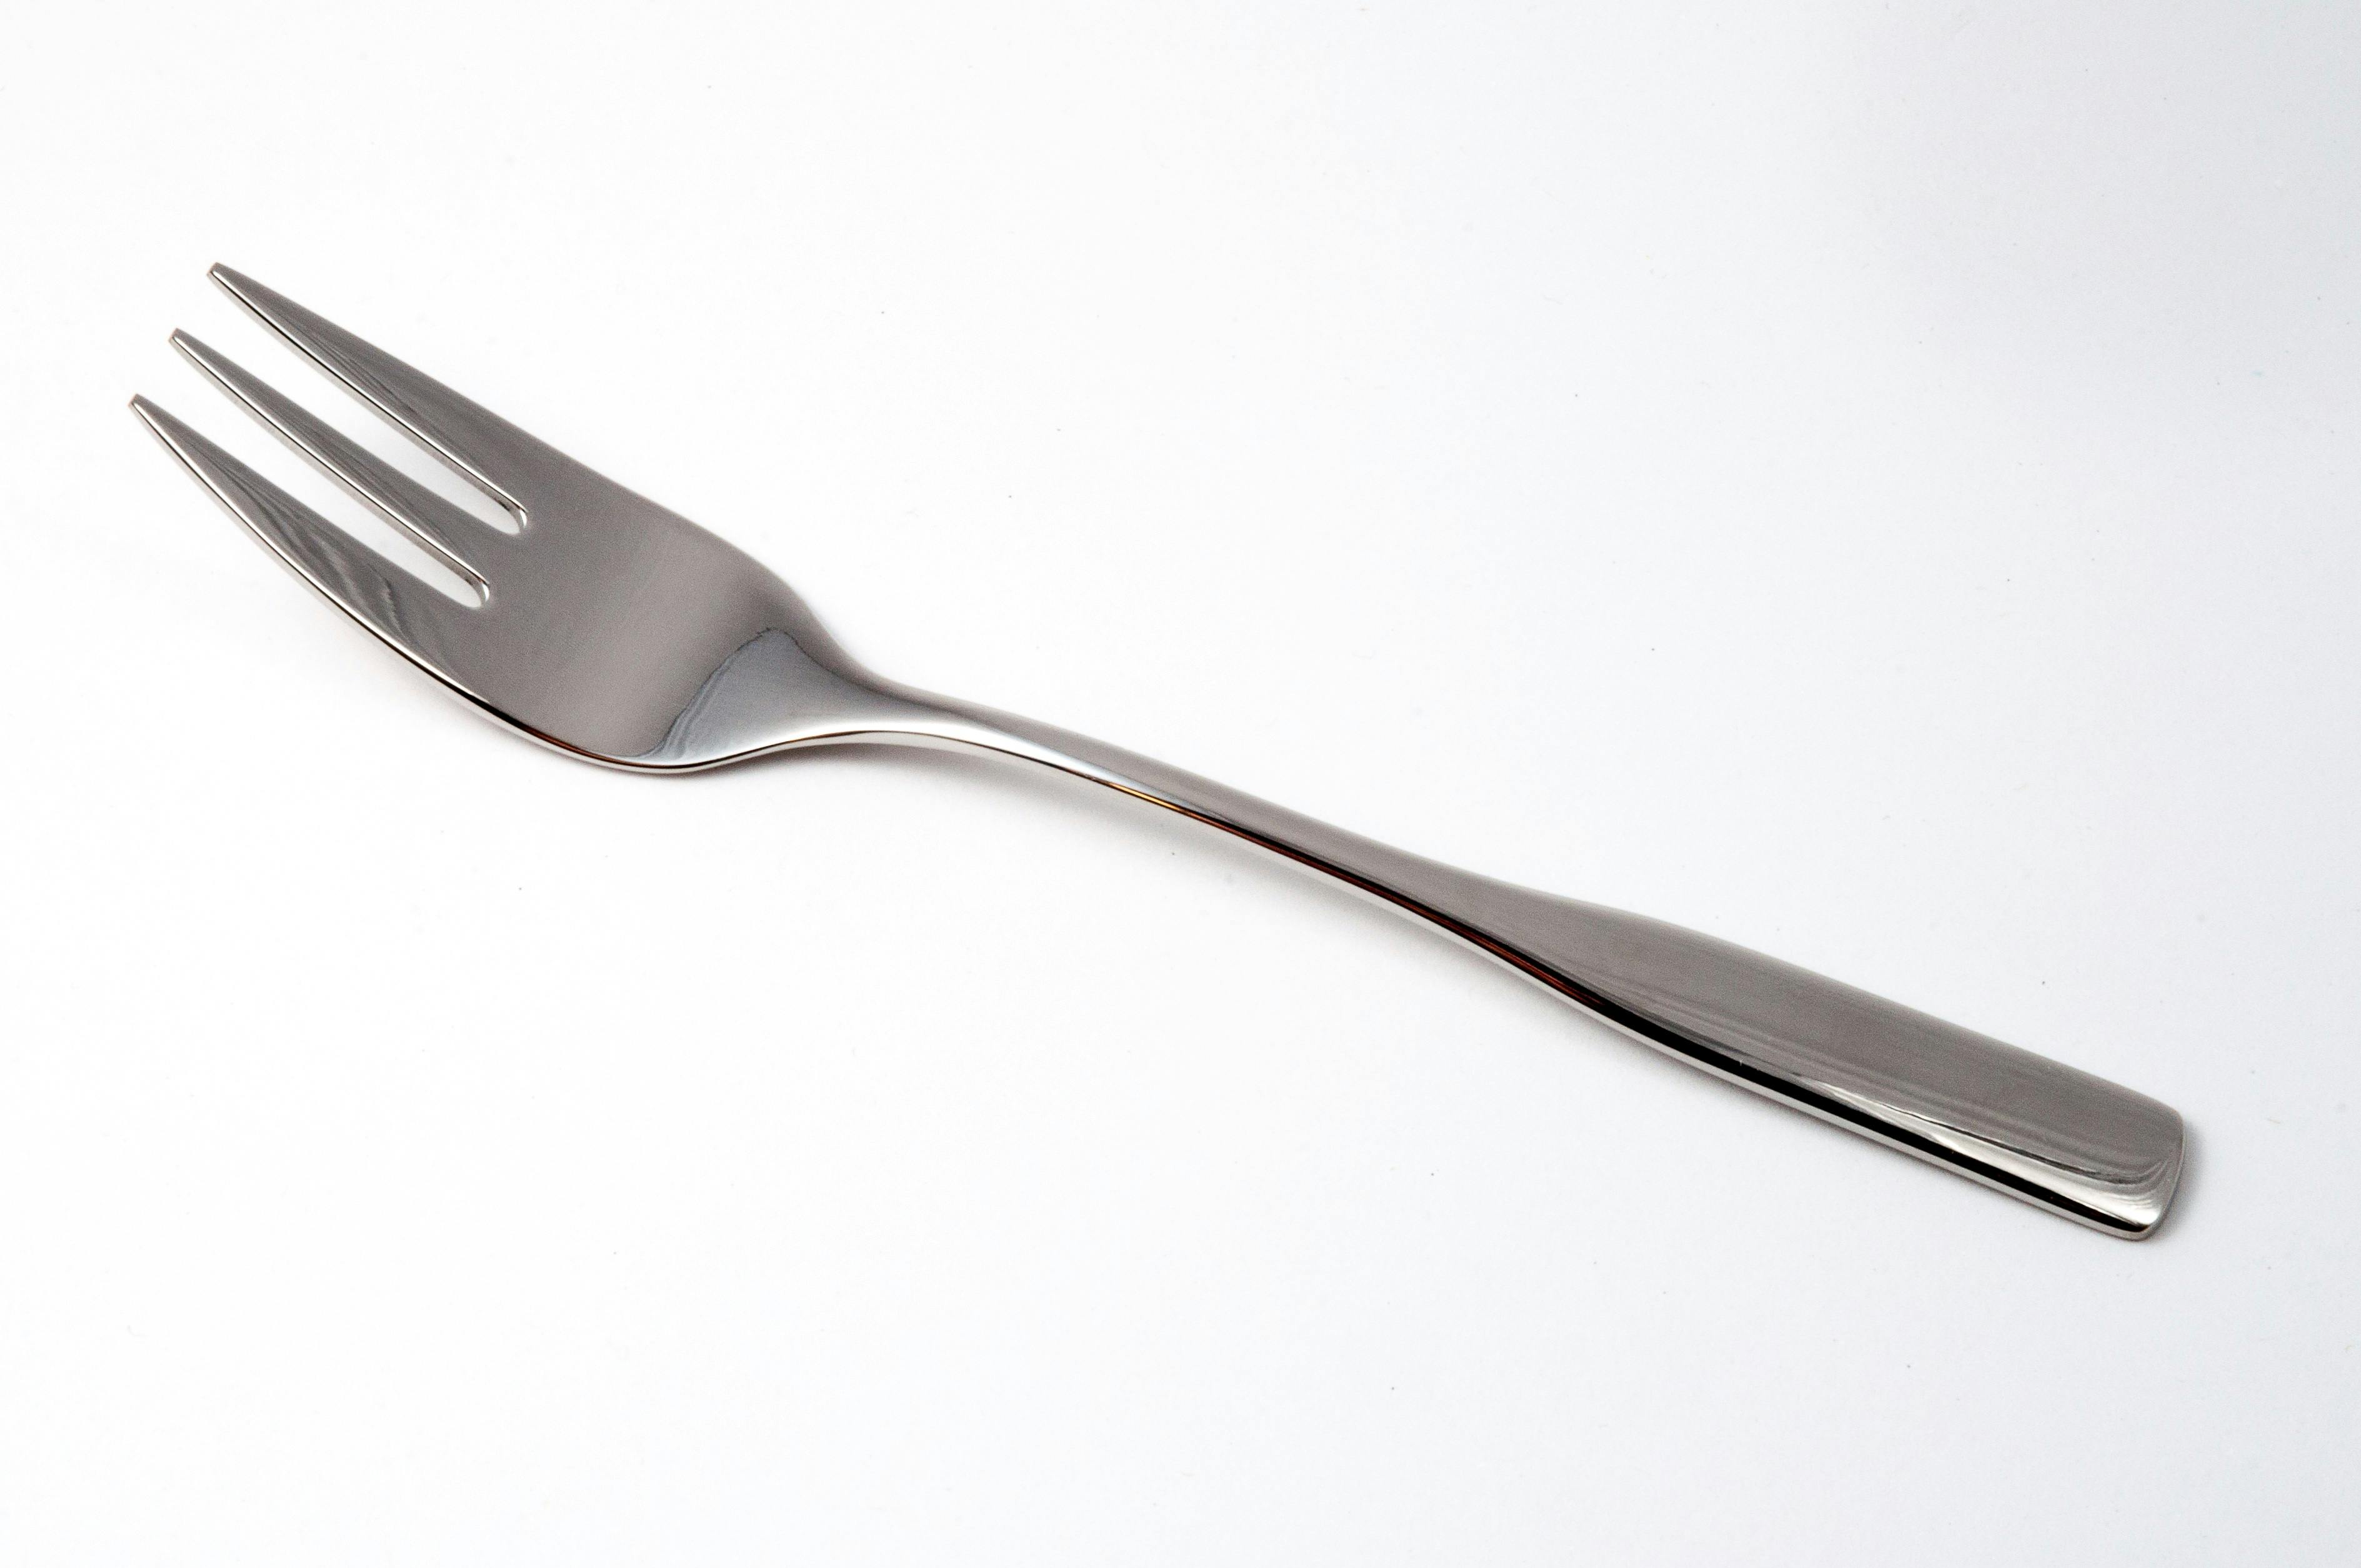 A Fork (so we can talk about the Bitcoin Fork).